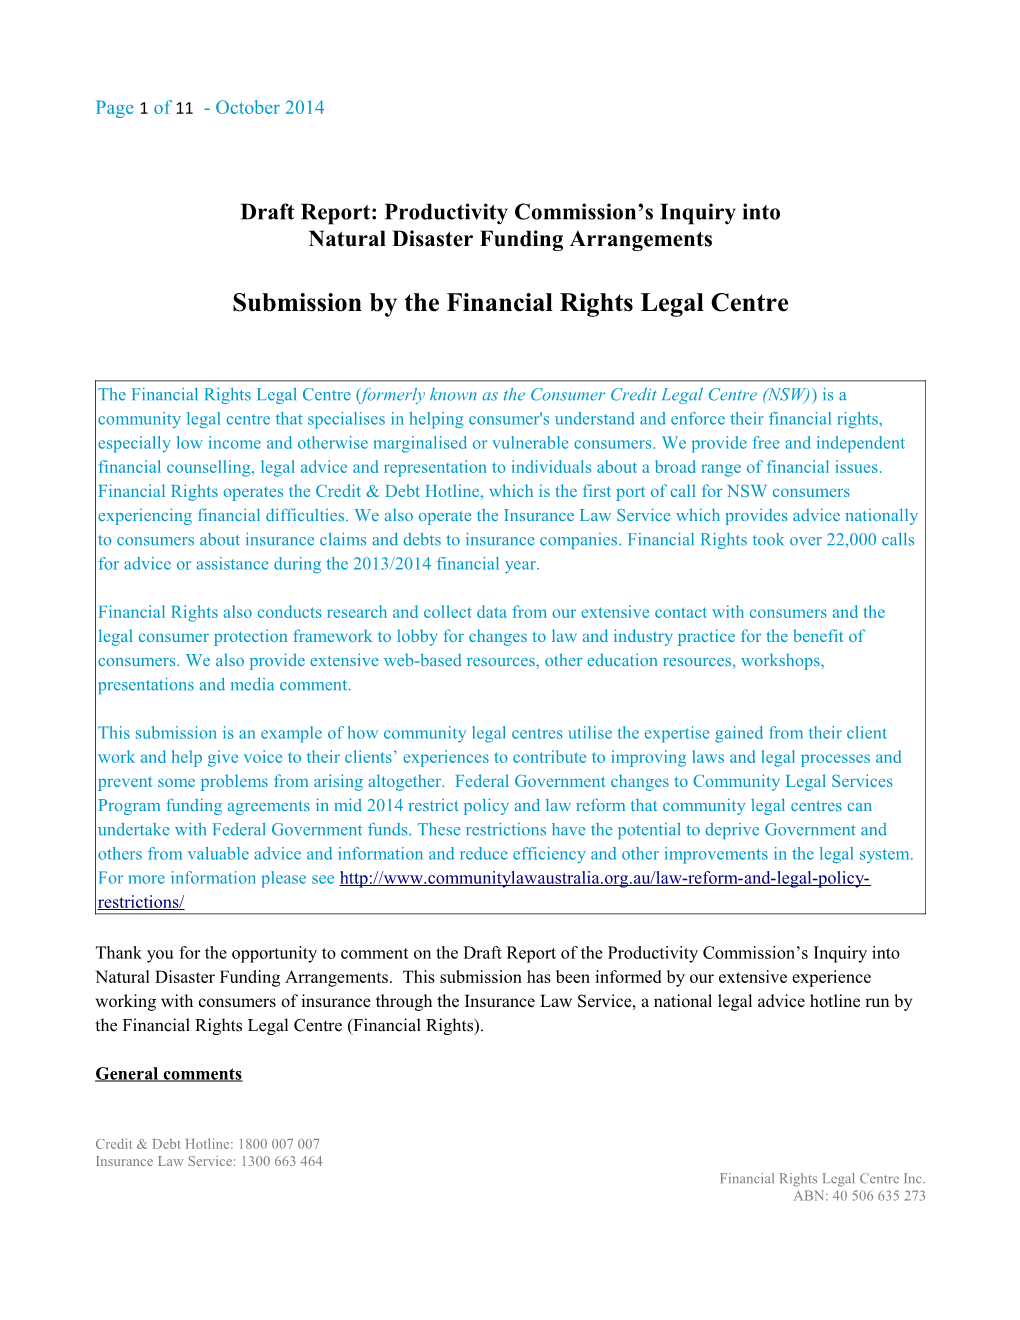 Submission DR130 - Financial Rights Legal Centre - Natural Disaster Funding - Public Inquiry